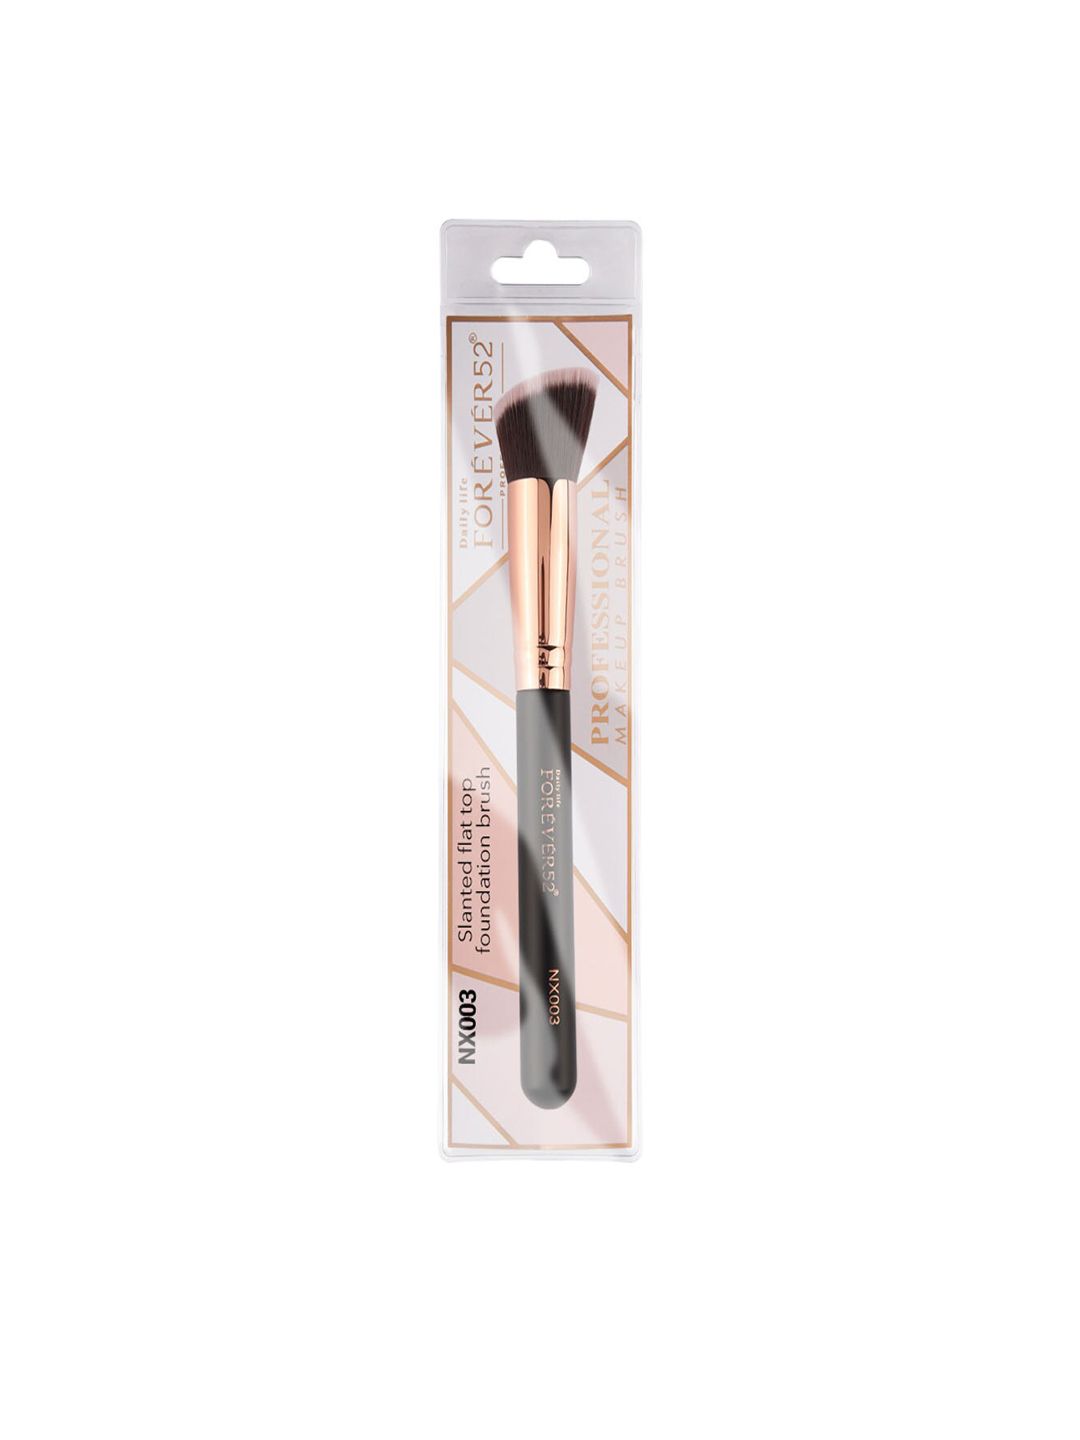 Daily Life Forever52 Contour Brush NX003 Price in India